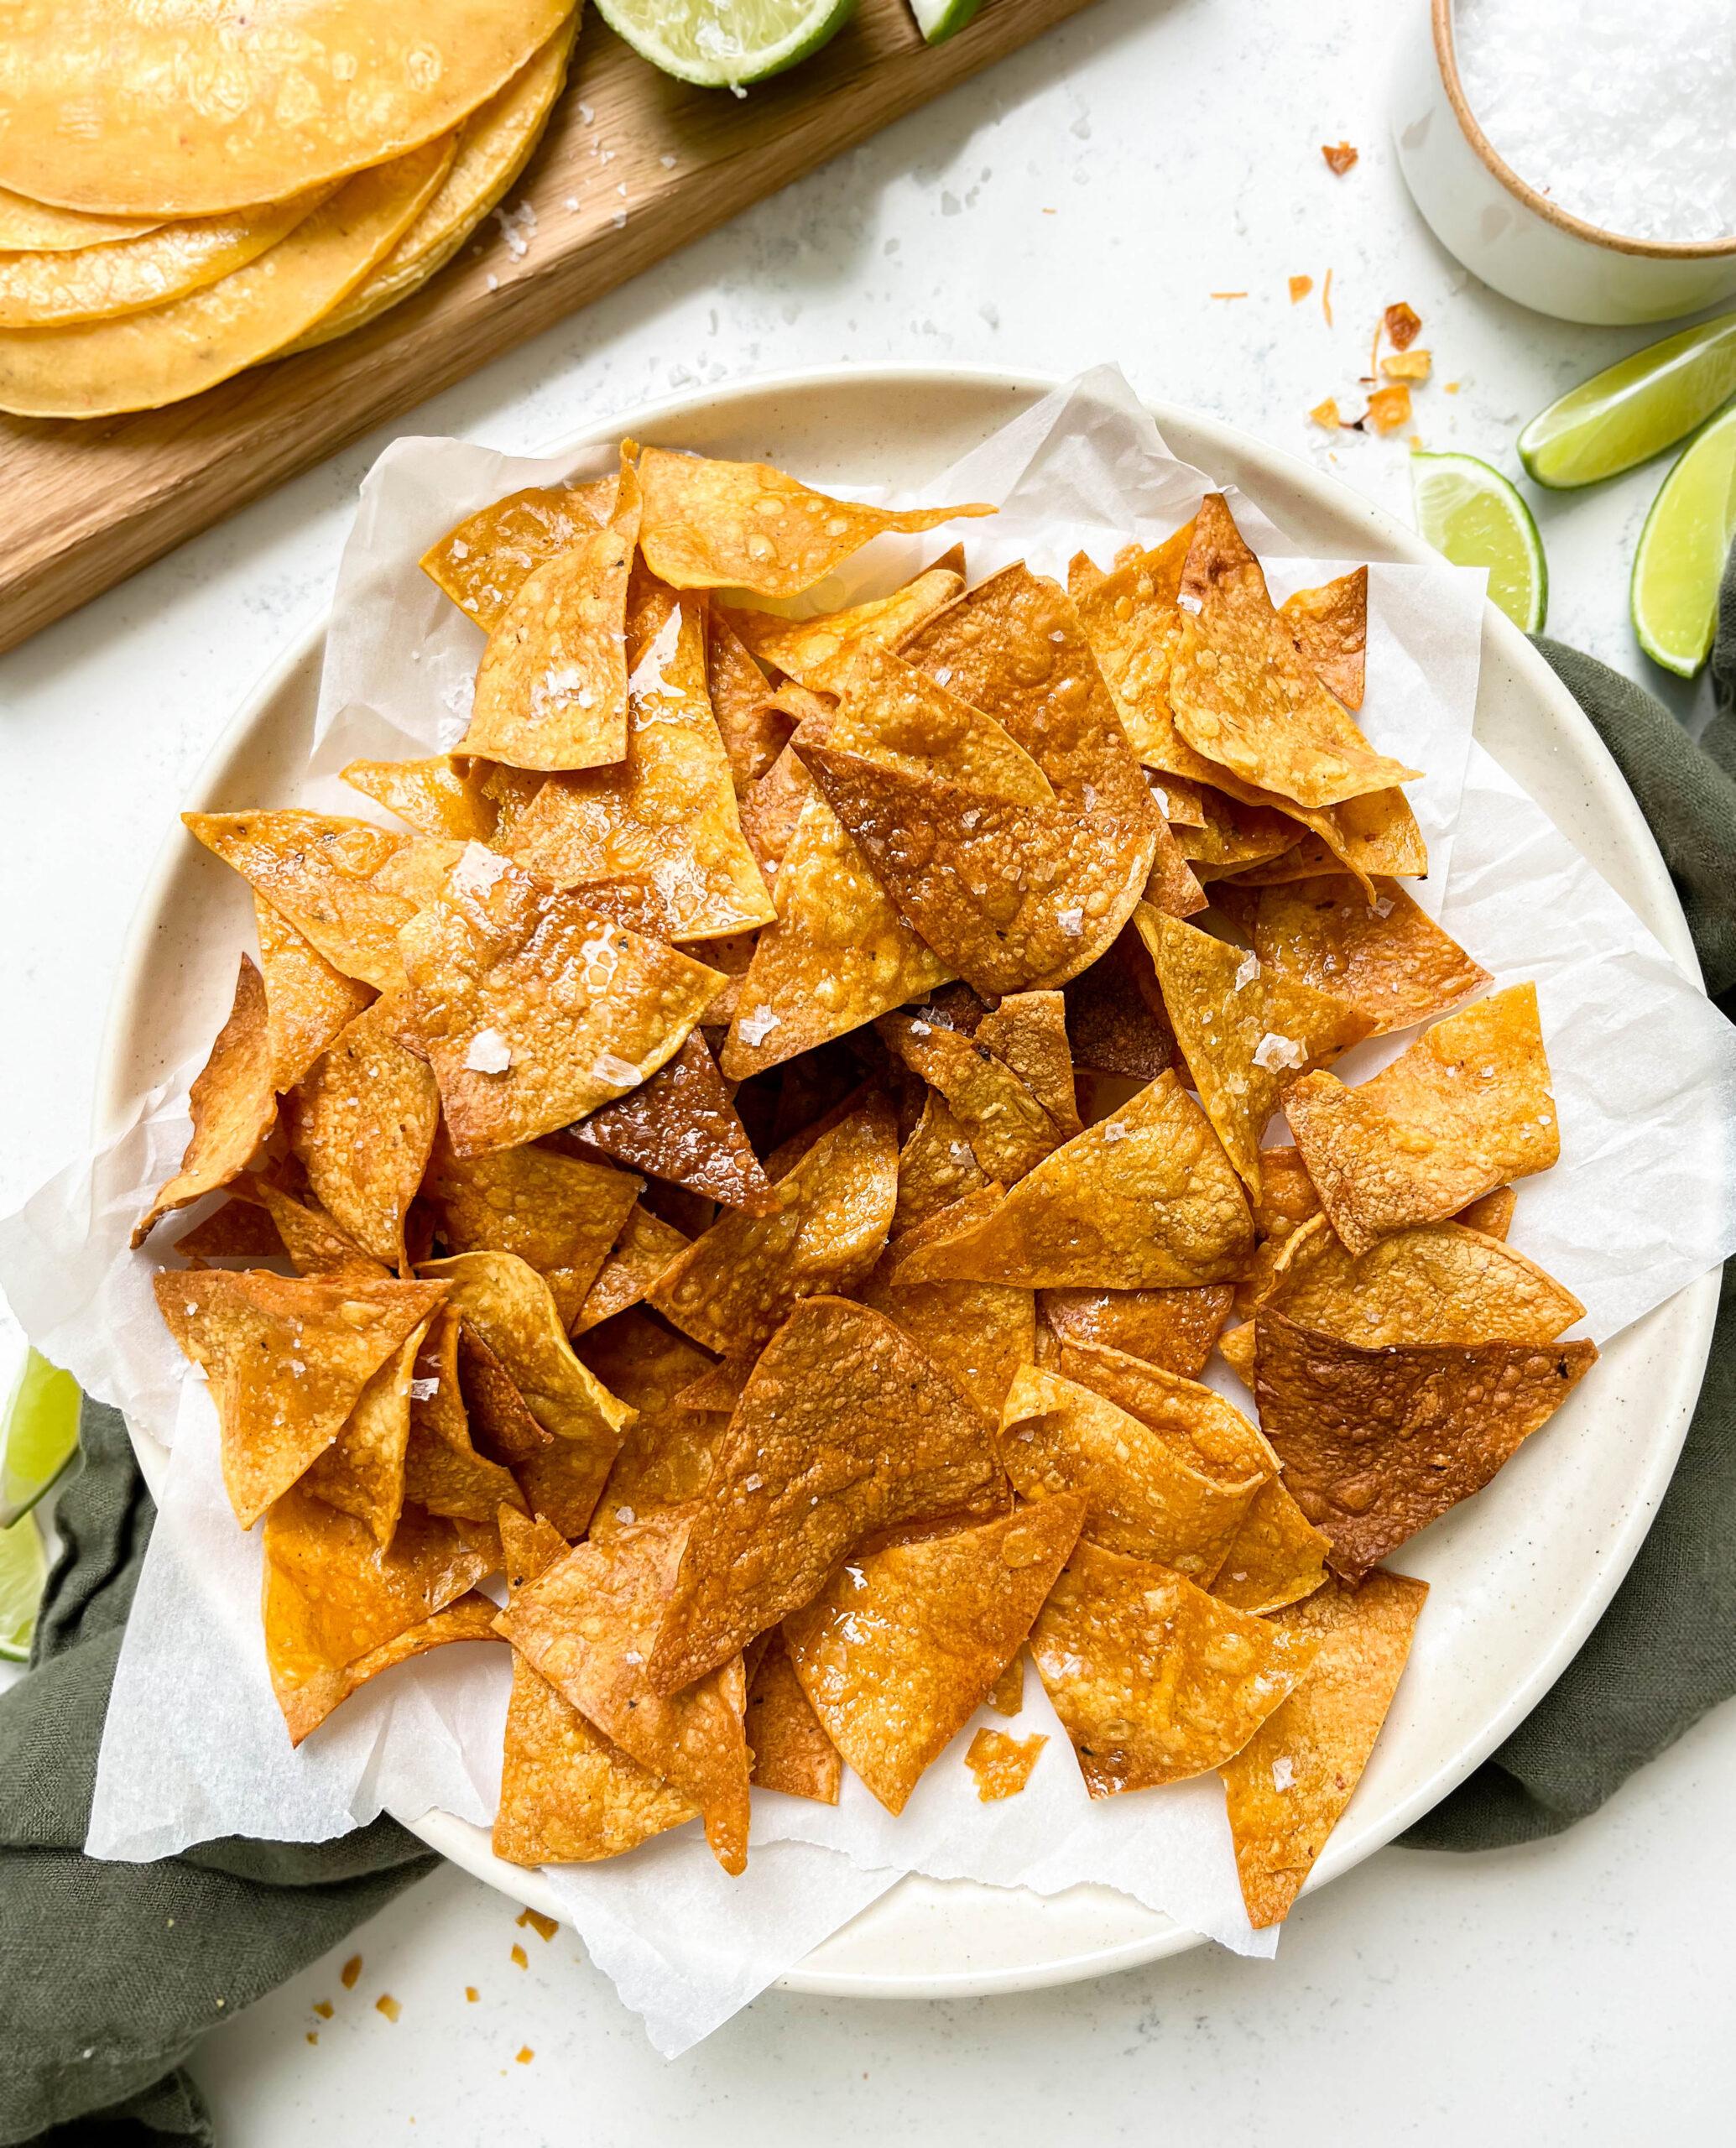 crispy homemade baked tortilla chips on a plate next to a board of tortillas and limes